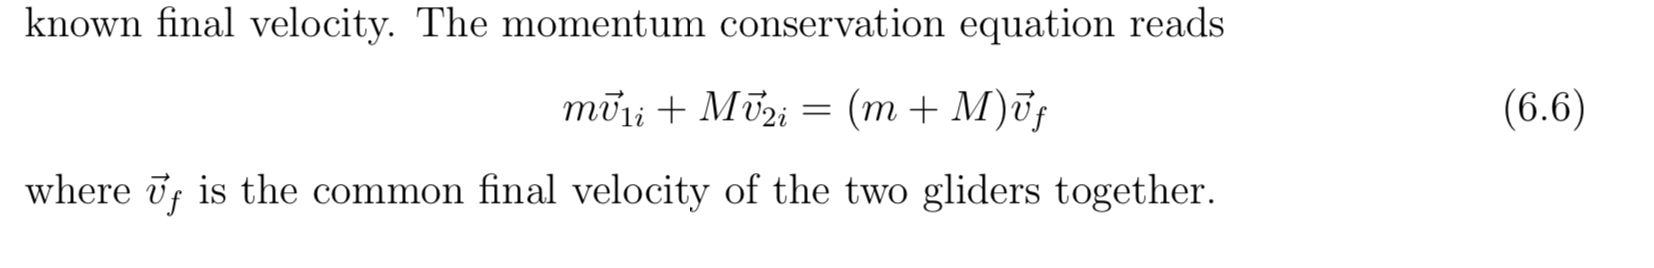 known final velocity. The momentum conservation equation reads
(m + M)ūj
(6.6)
moliMi
where f is the common final velocity of the two gliders together
